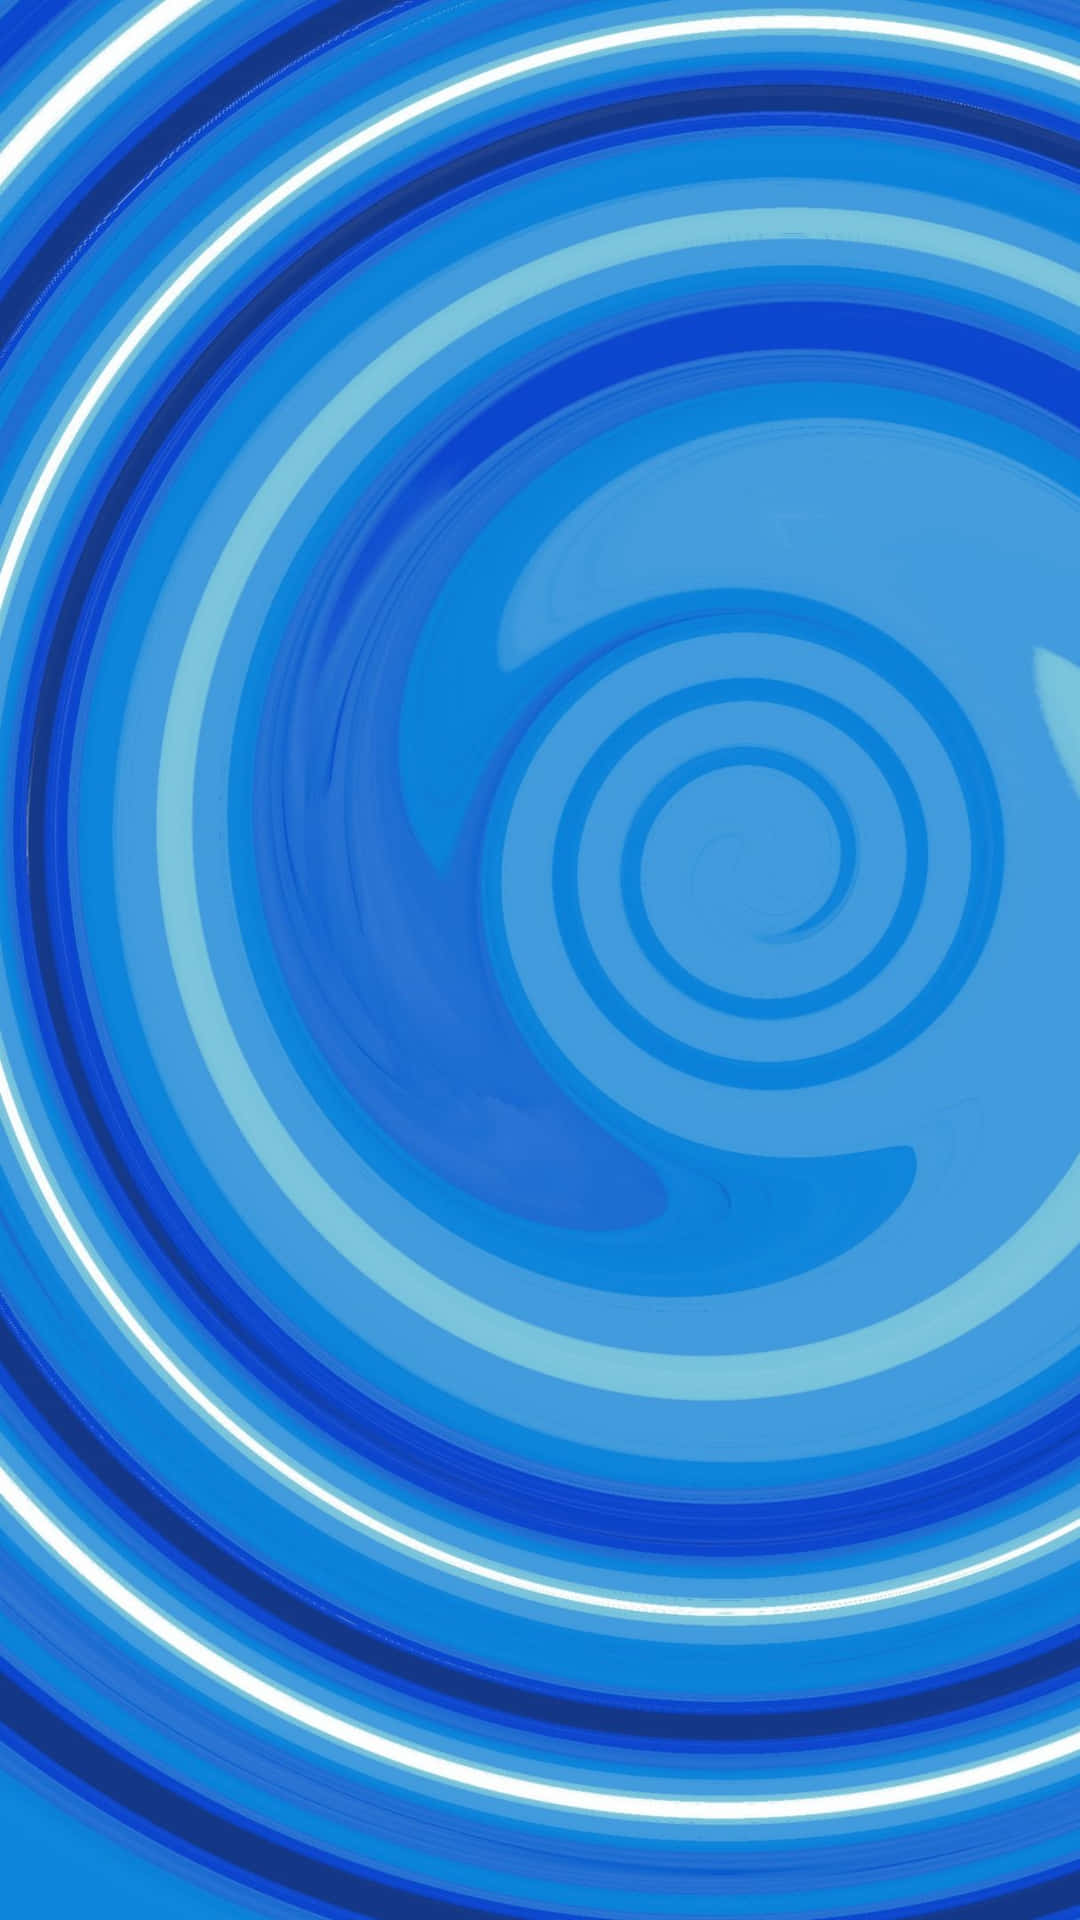 A beautiful blue swirl against a white background